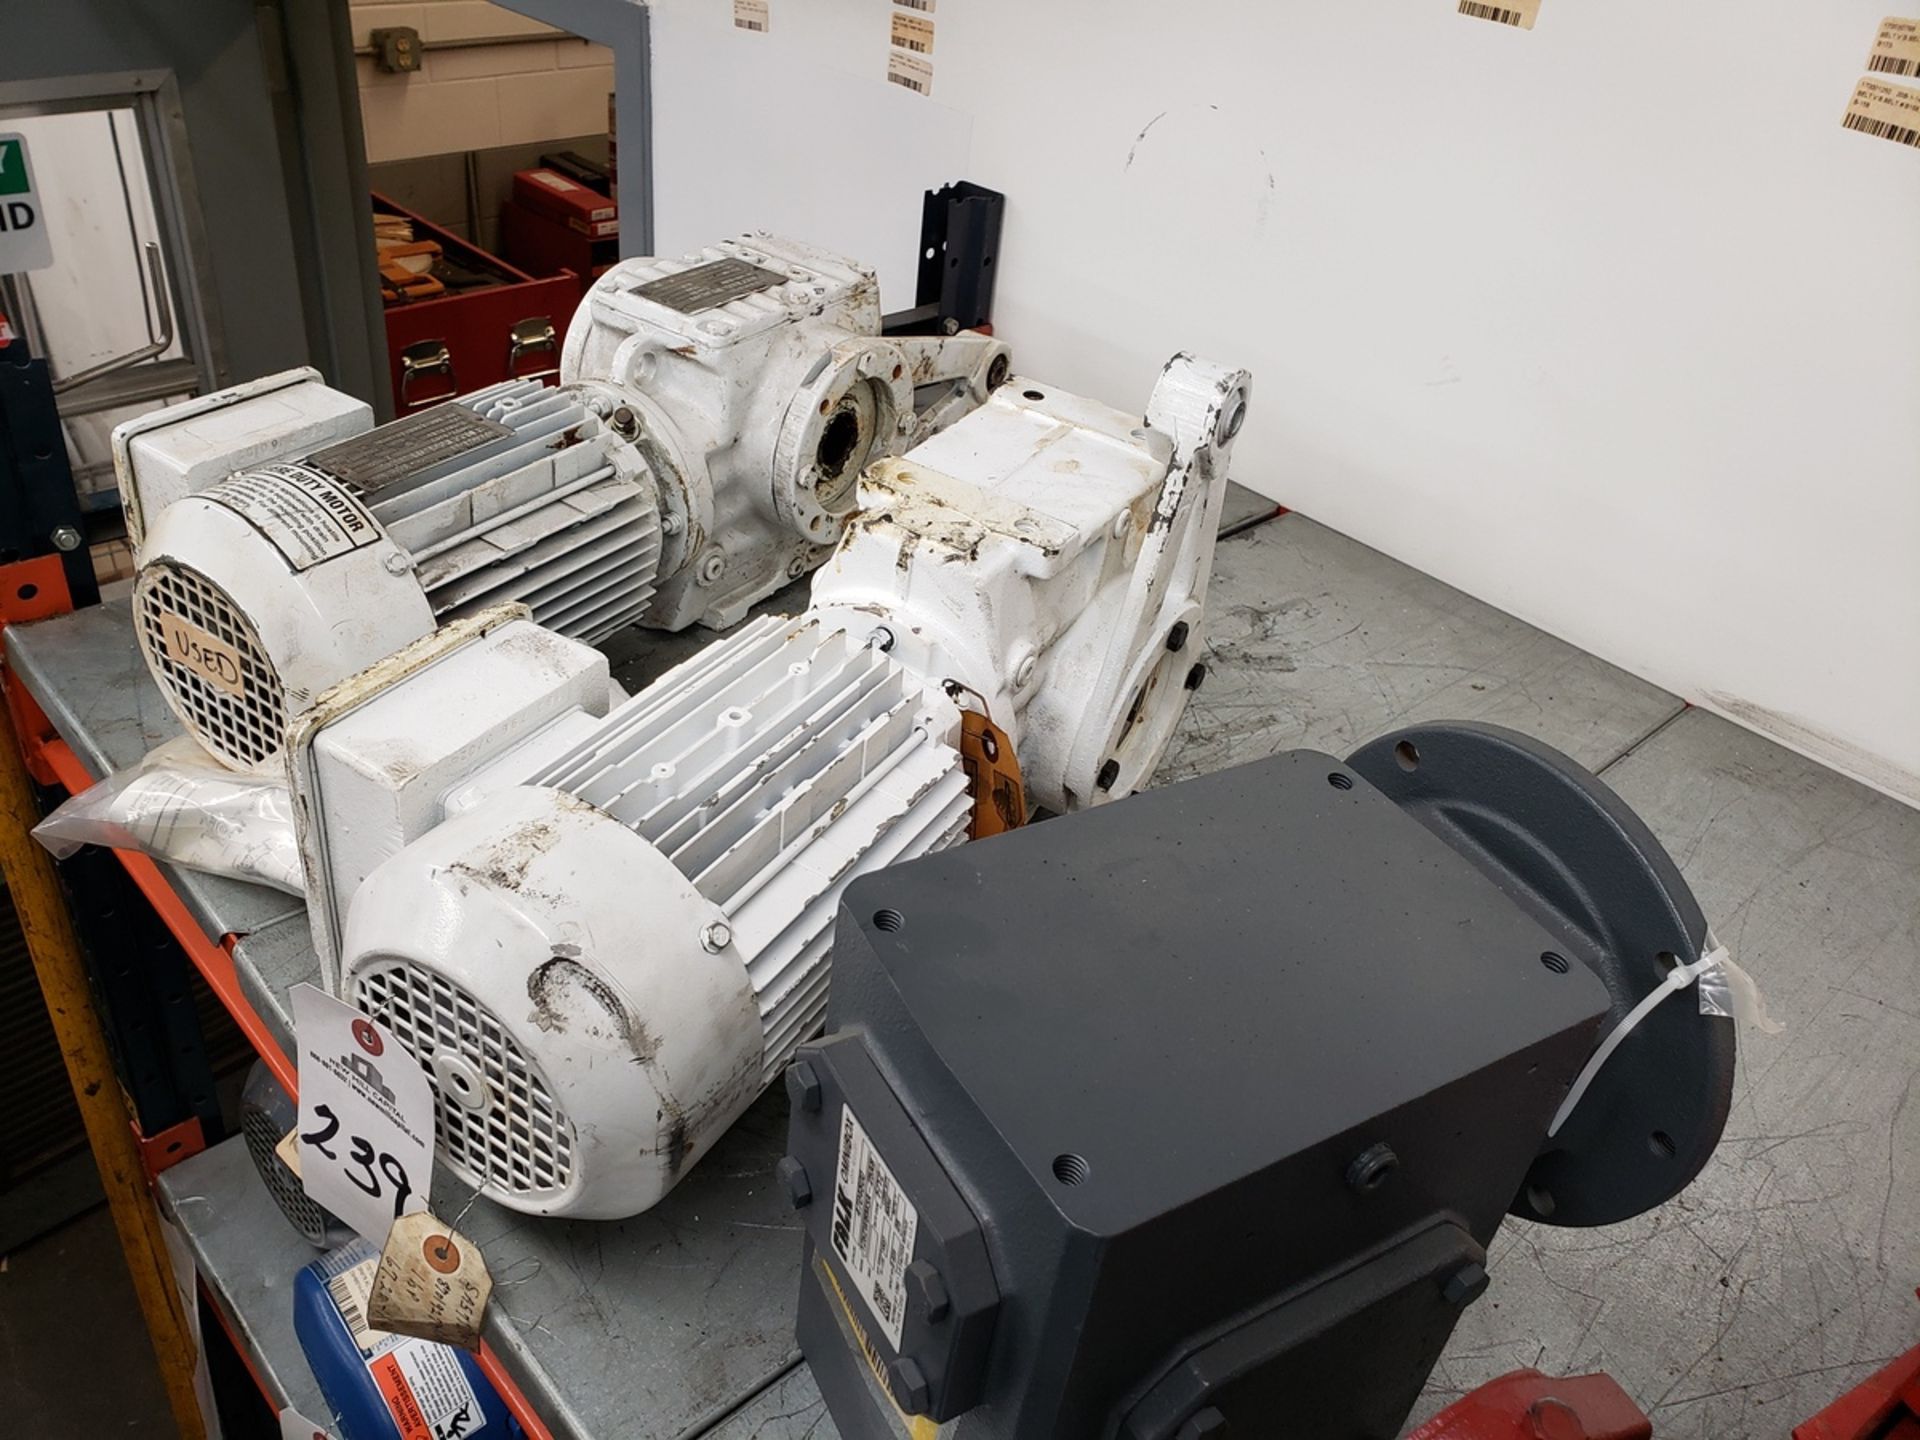 Lot of Pumps, Electric Motors & Gearboxes - Subj to Bulk | Reqd Rig Fee: $100 - Image 2 of 3